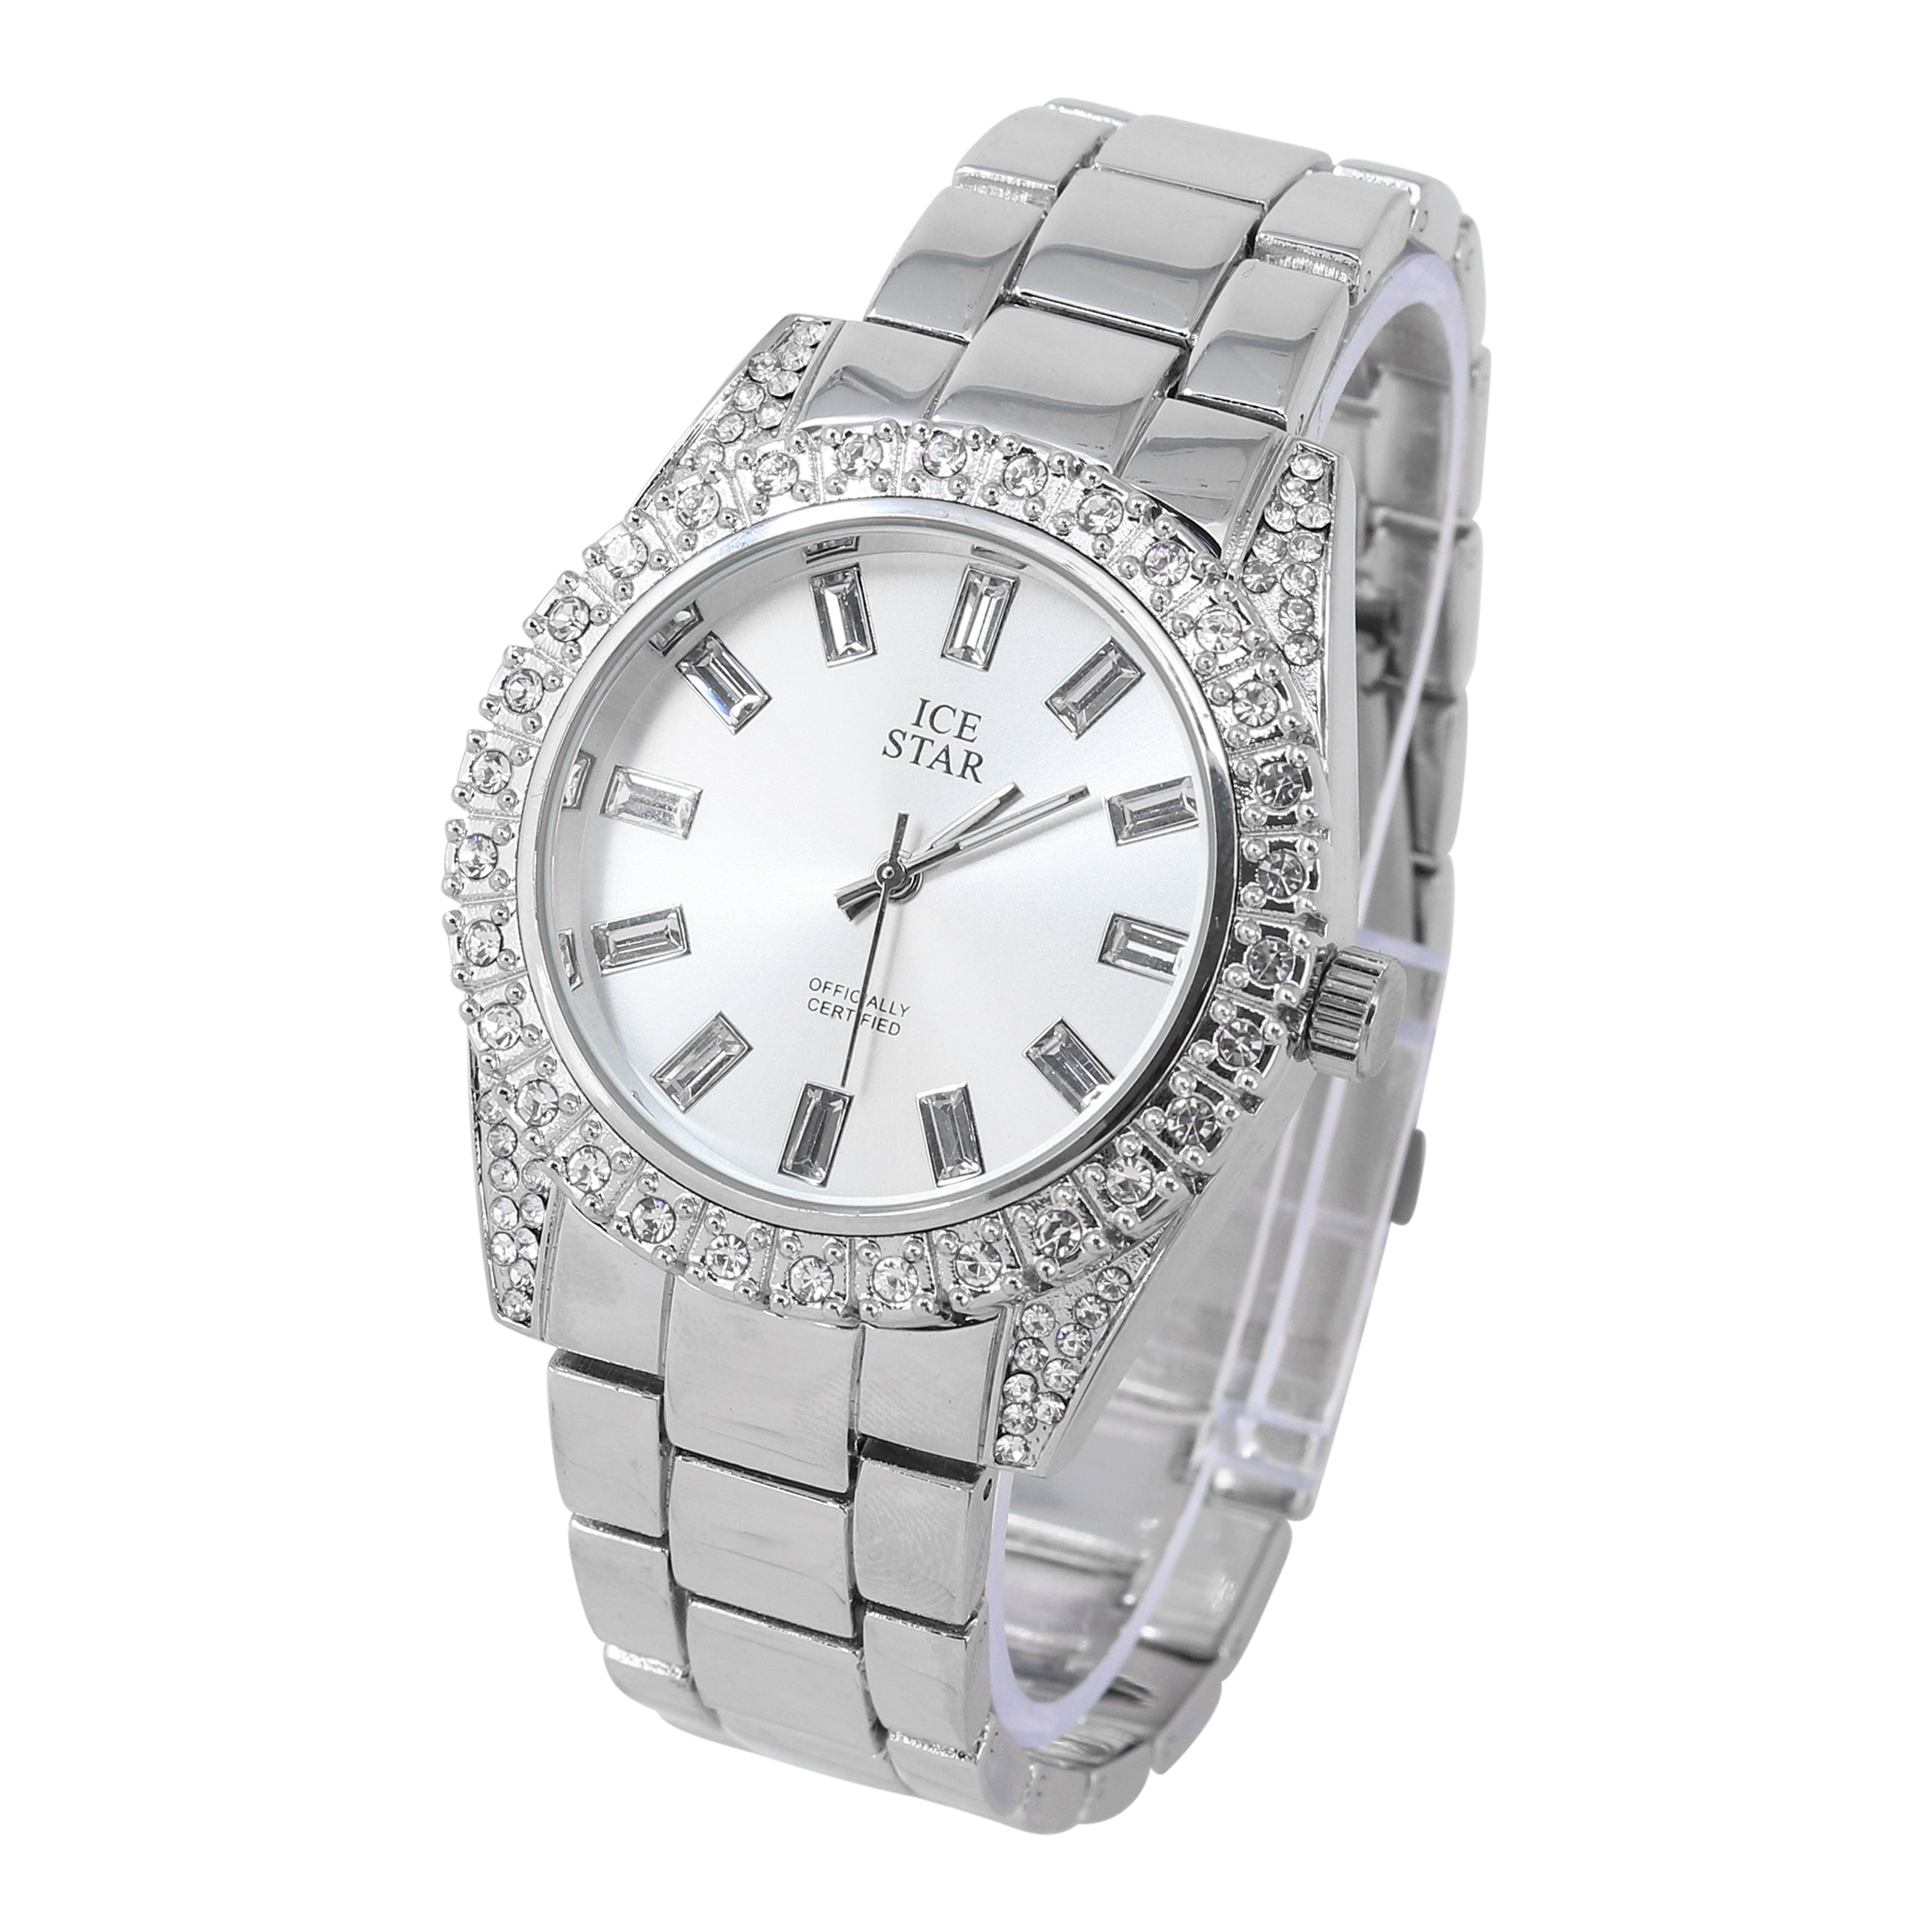 Women's Round Iced Out Watch 41mm Silver - Baguette Dial